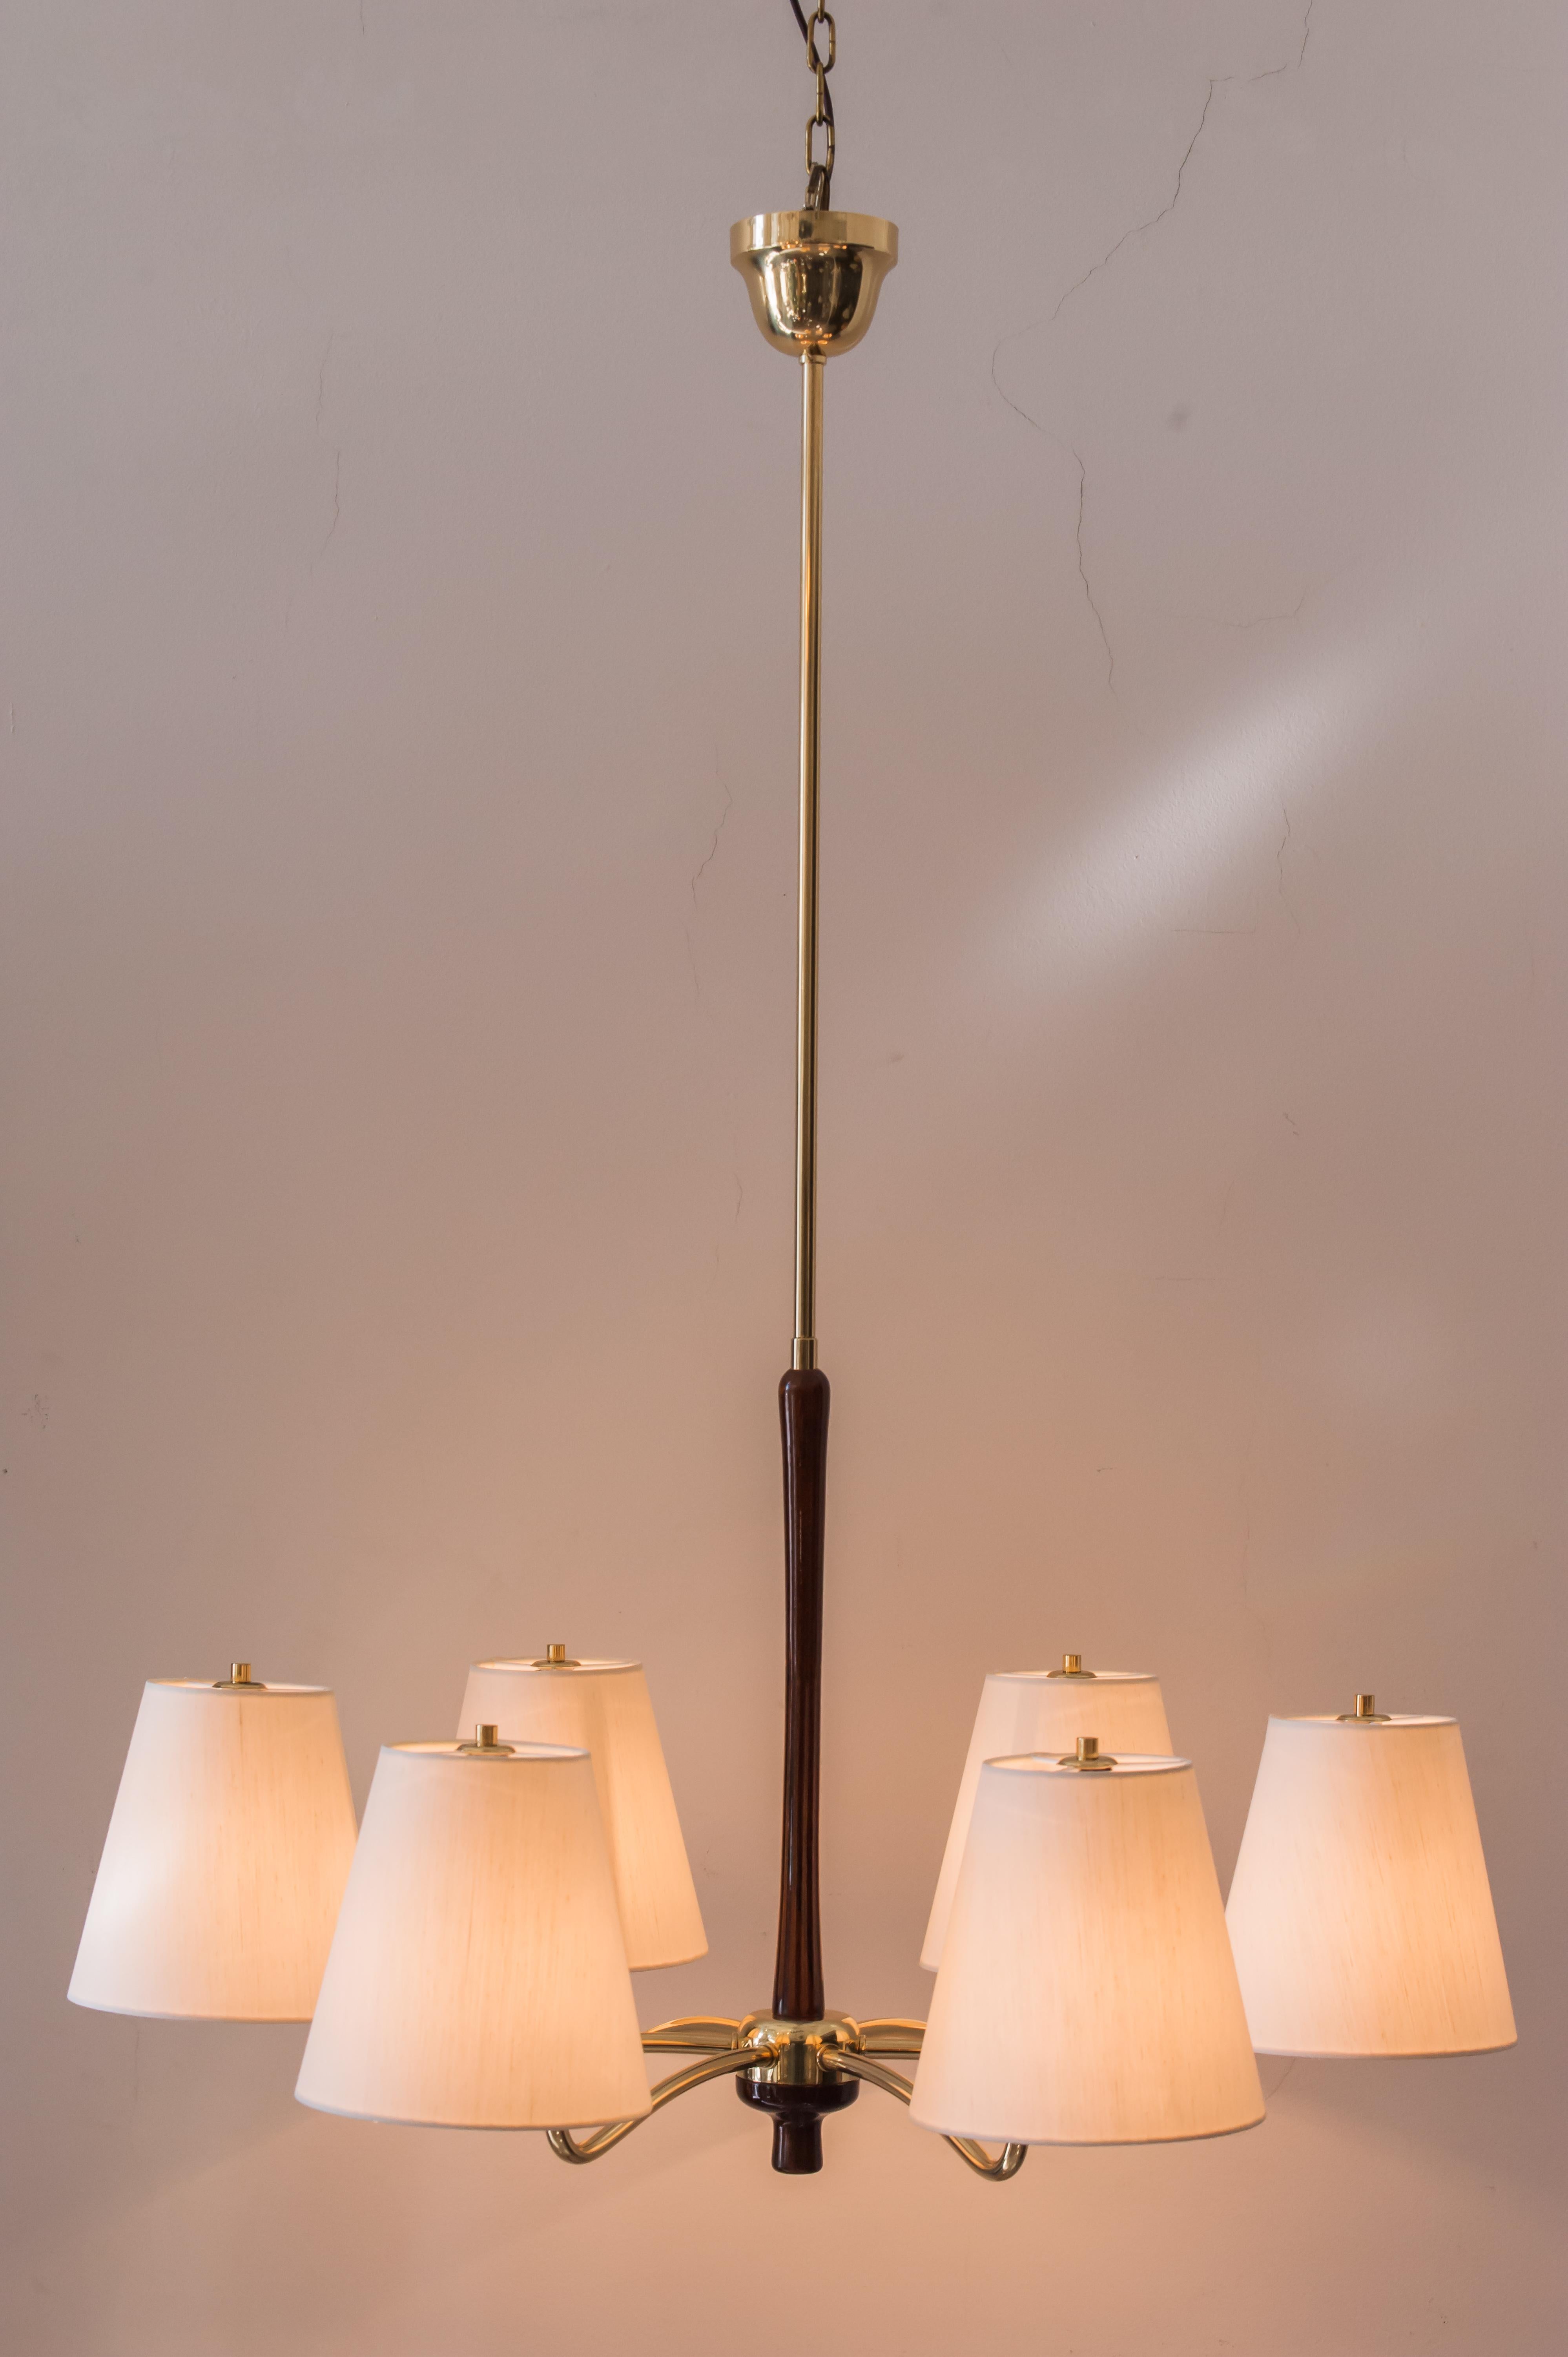 Kalmar 6-arm chandelier with fabric shades, 1950s.
Shades replaced (new).
Polished and stove enameled.
Wood polished.
 